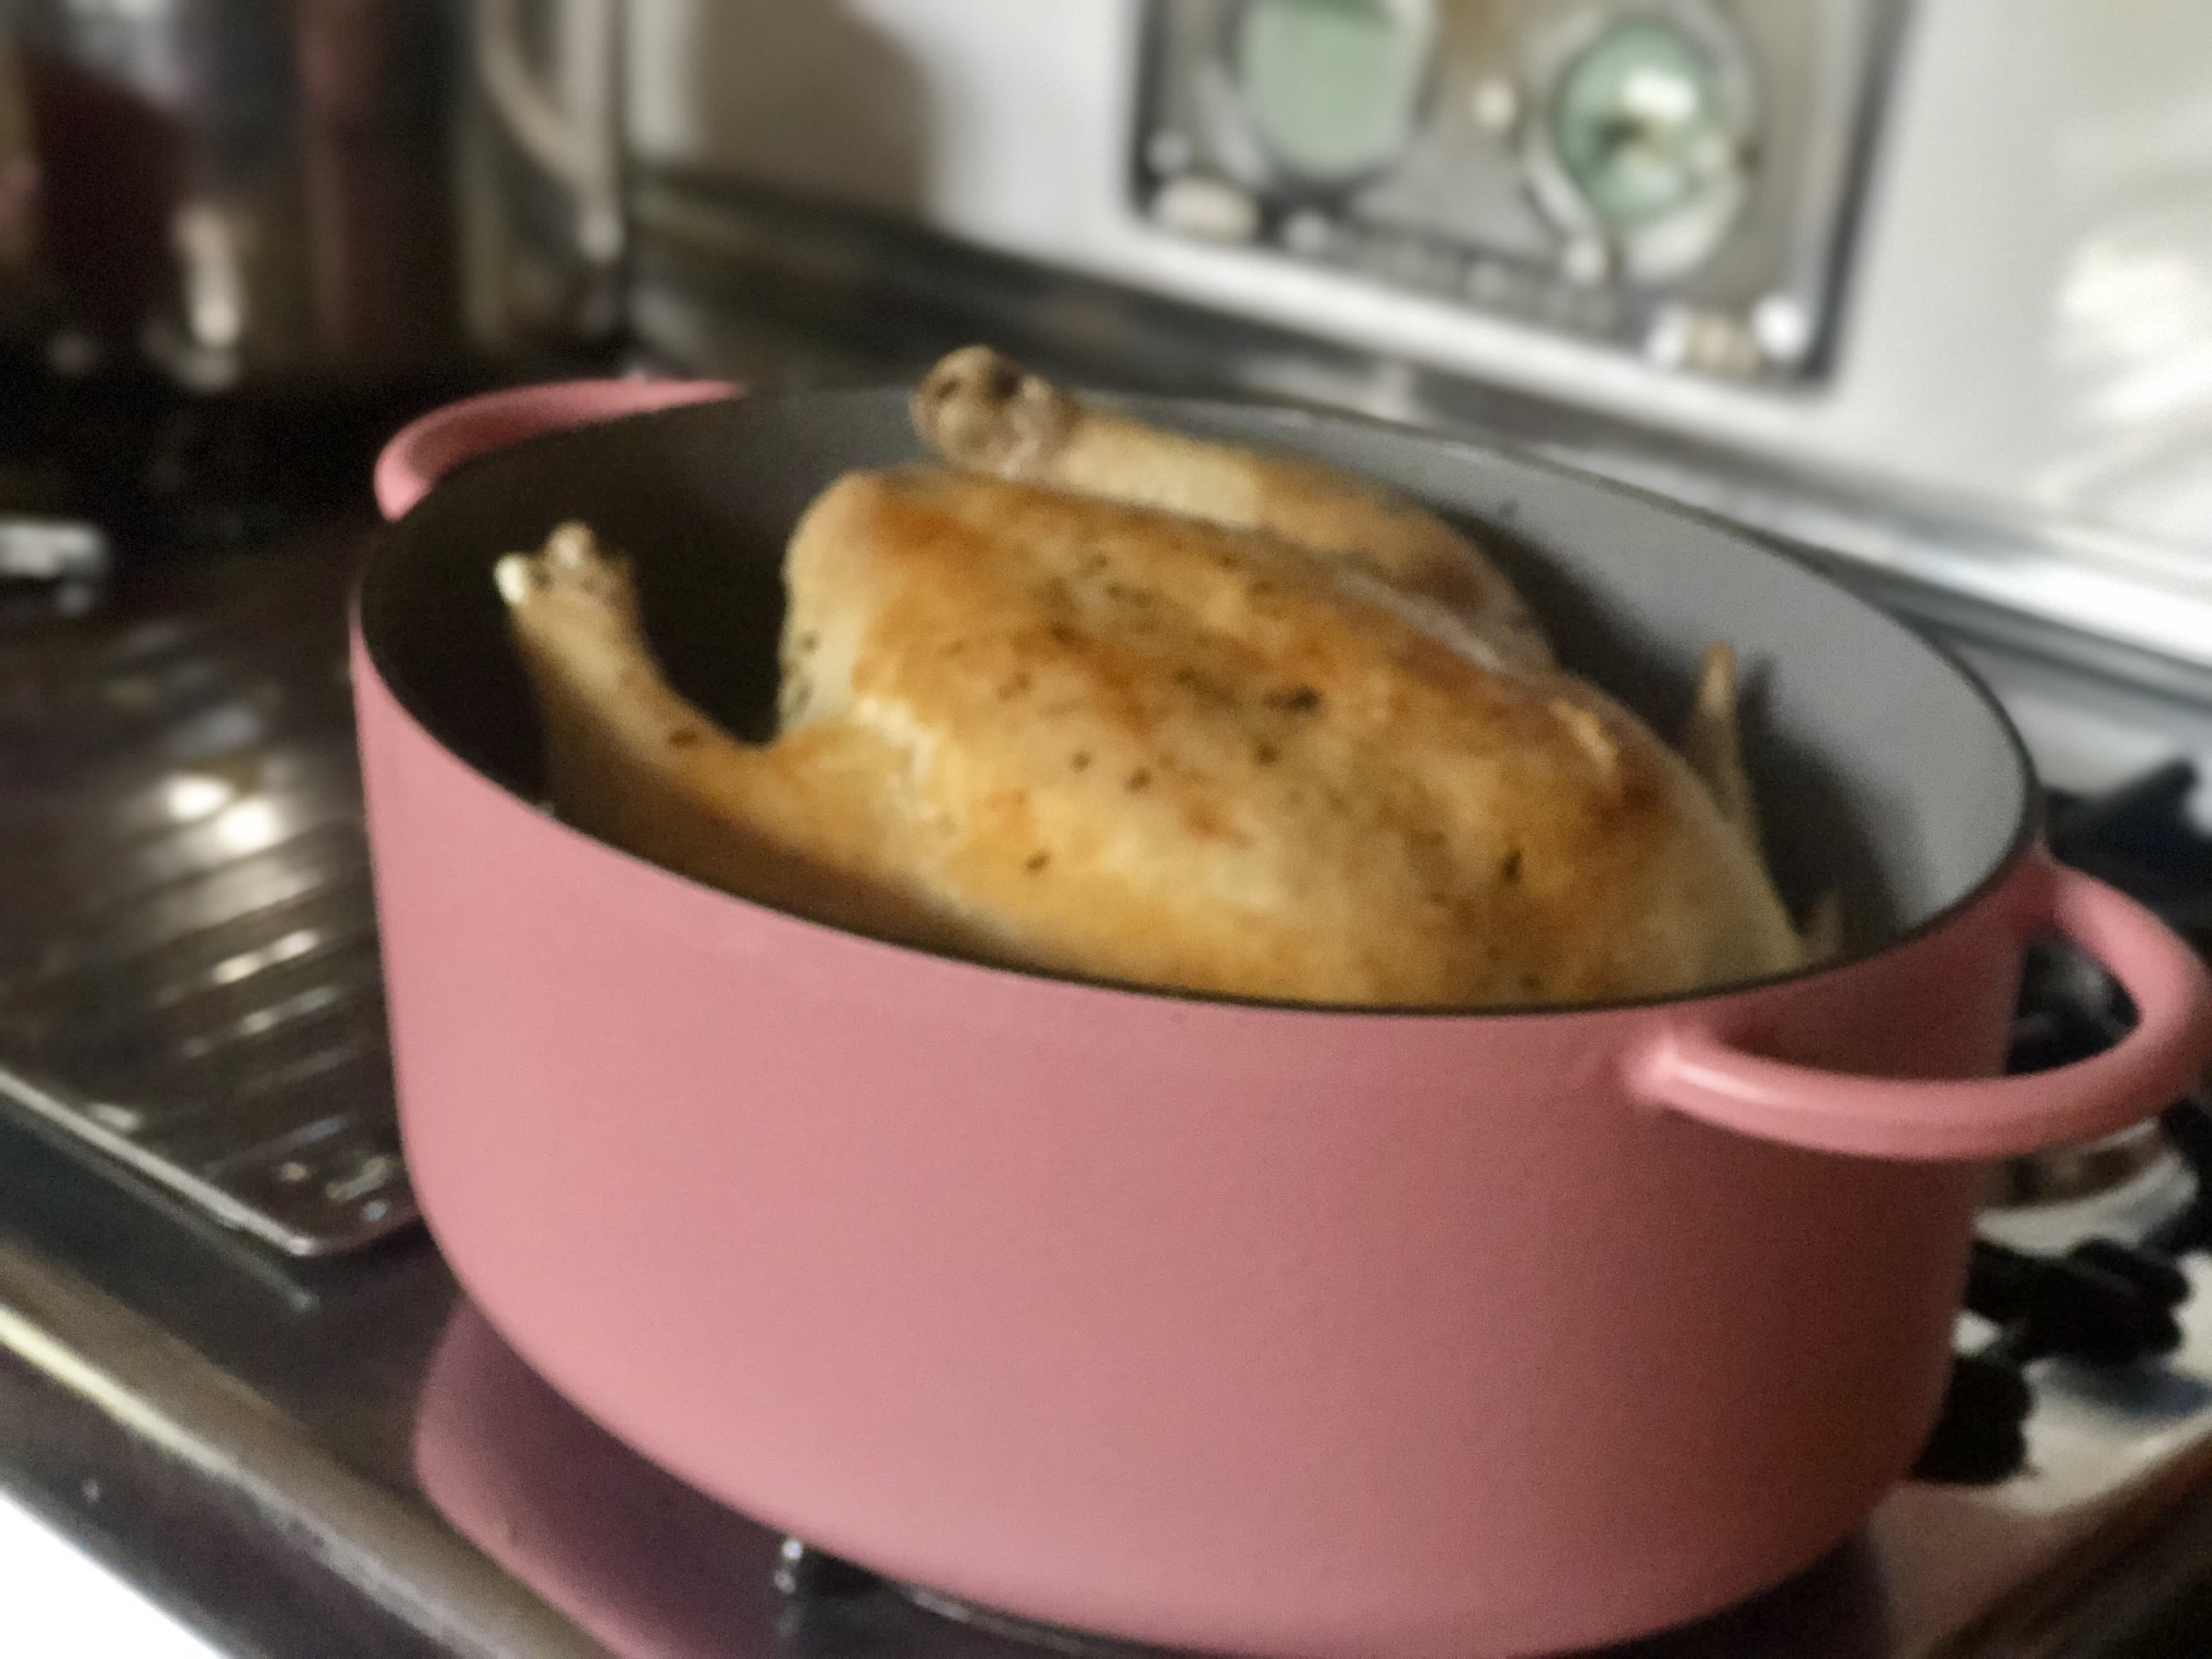 Great Jones Dutch Baby Review: A small but mighty Dutch oven - Reviewed